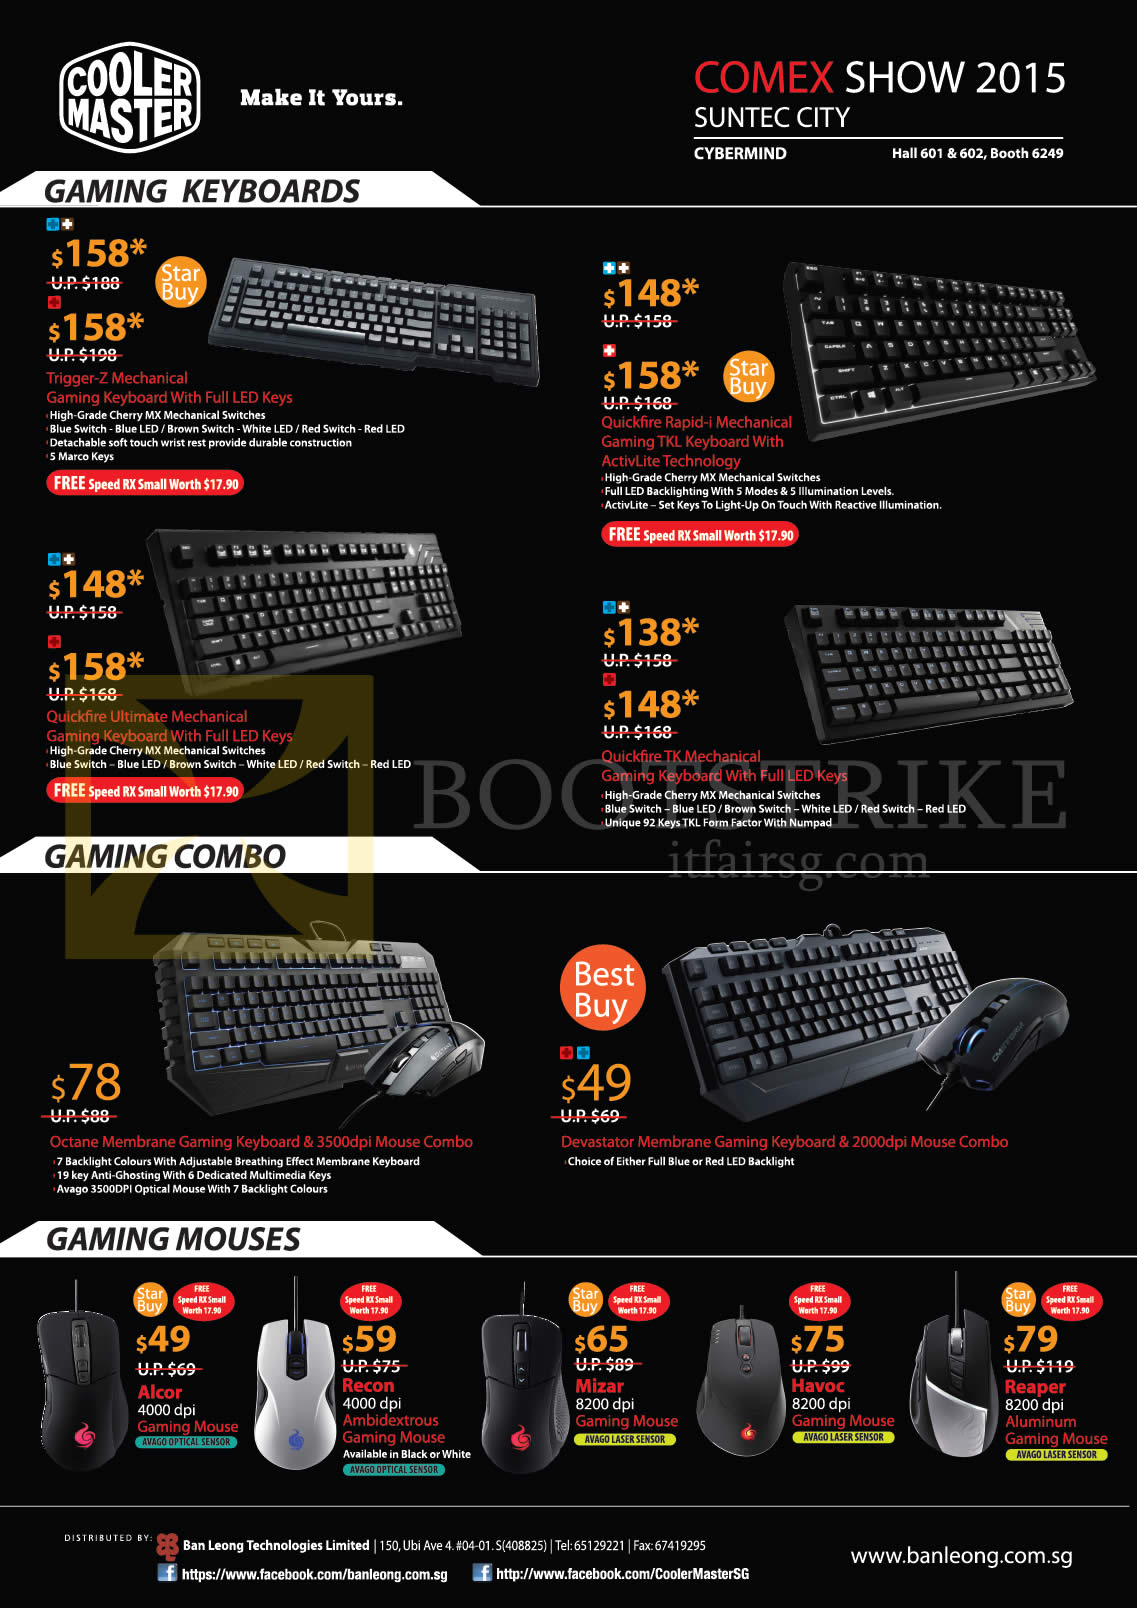 COMEX 2015 price list image brochure of Cooler Master Keyboards, Gaming Combo, Mouses, Tricker Z, Quickfire, Octane Membrane, Alcor, Recon, Mizar, Havoc, Reaper